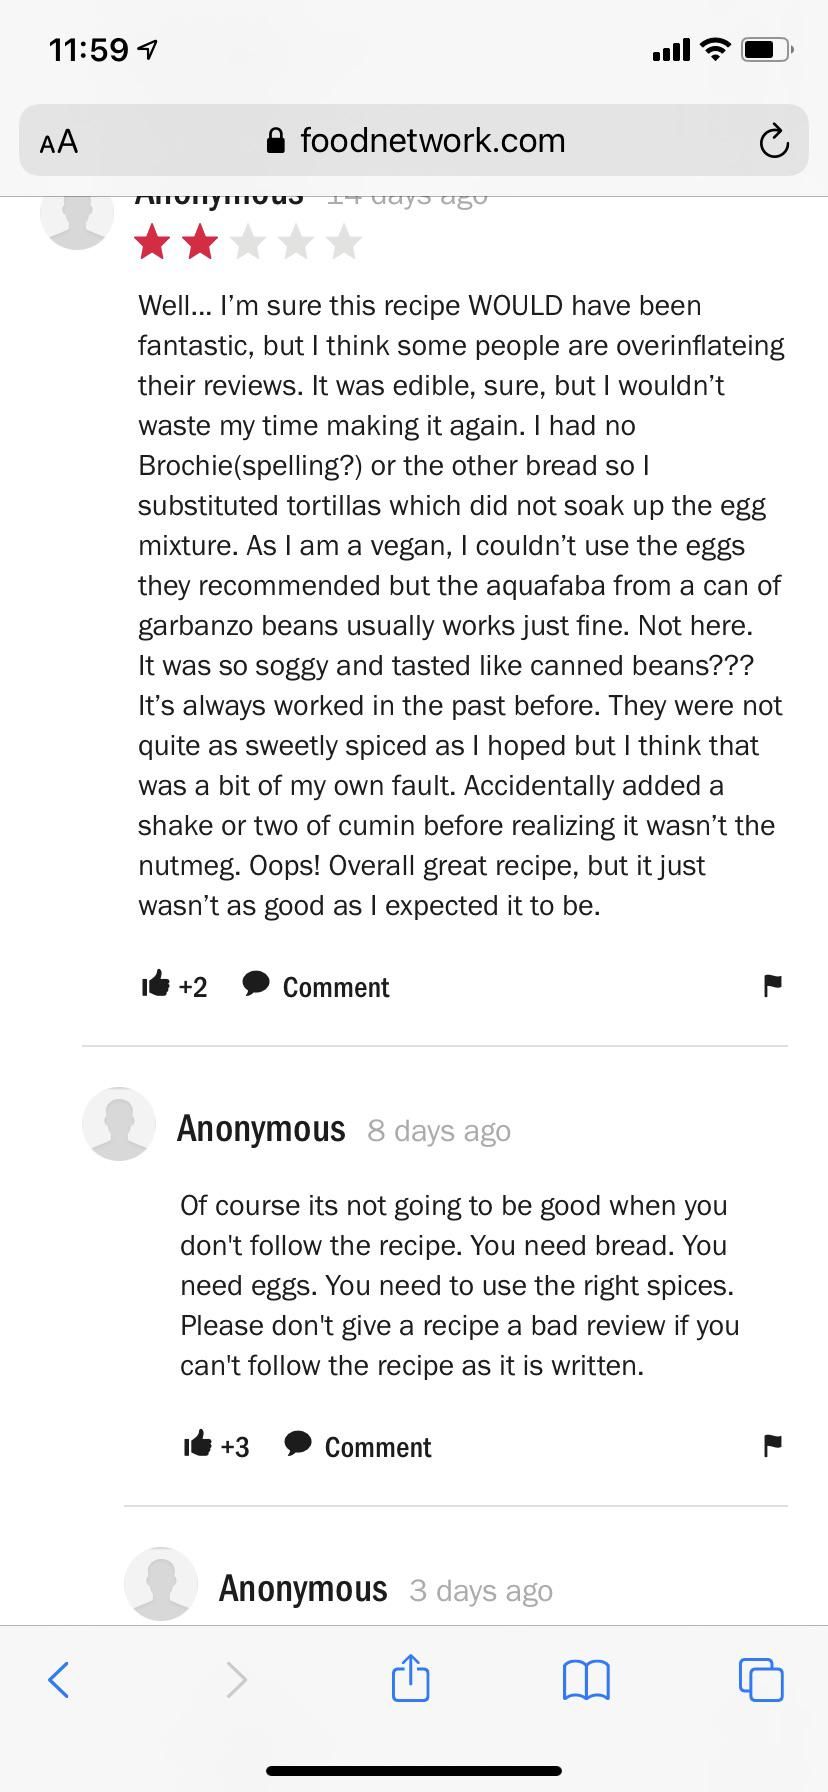 This is a review for a French toast recipe